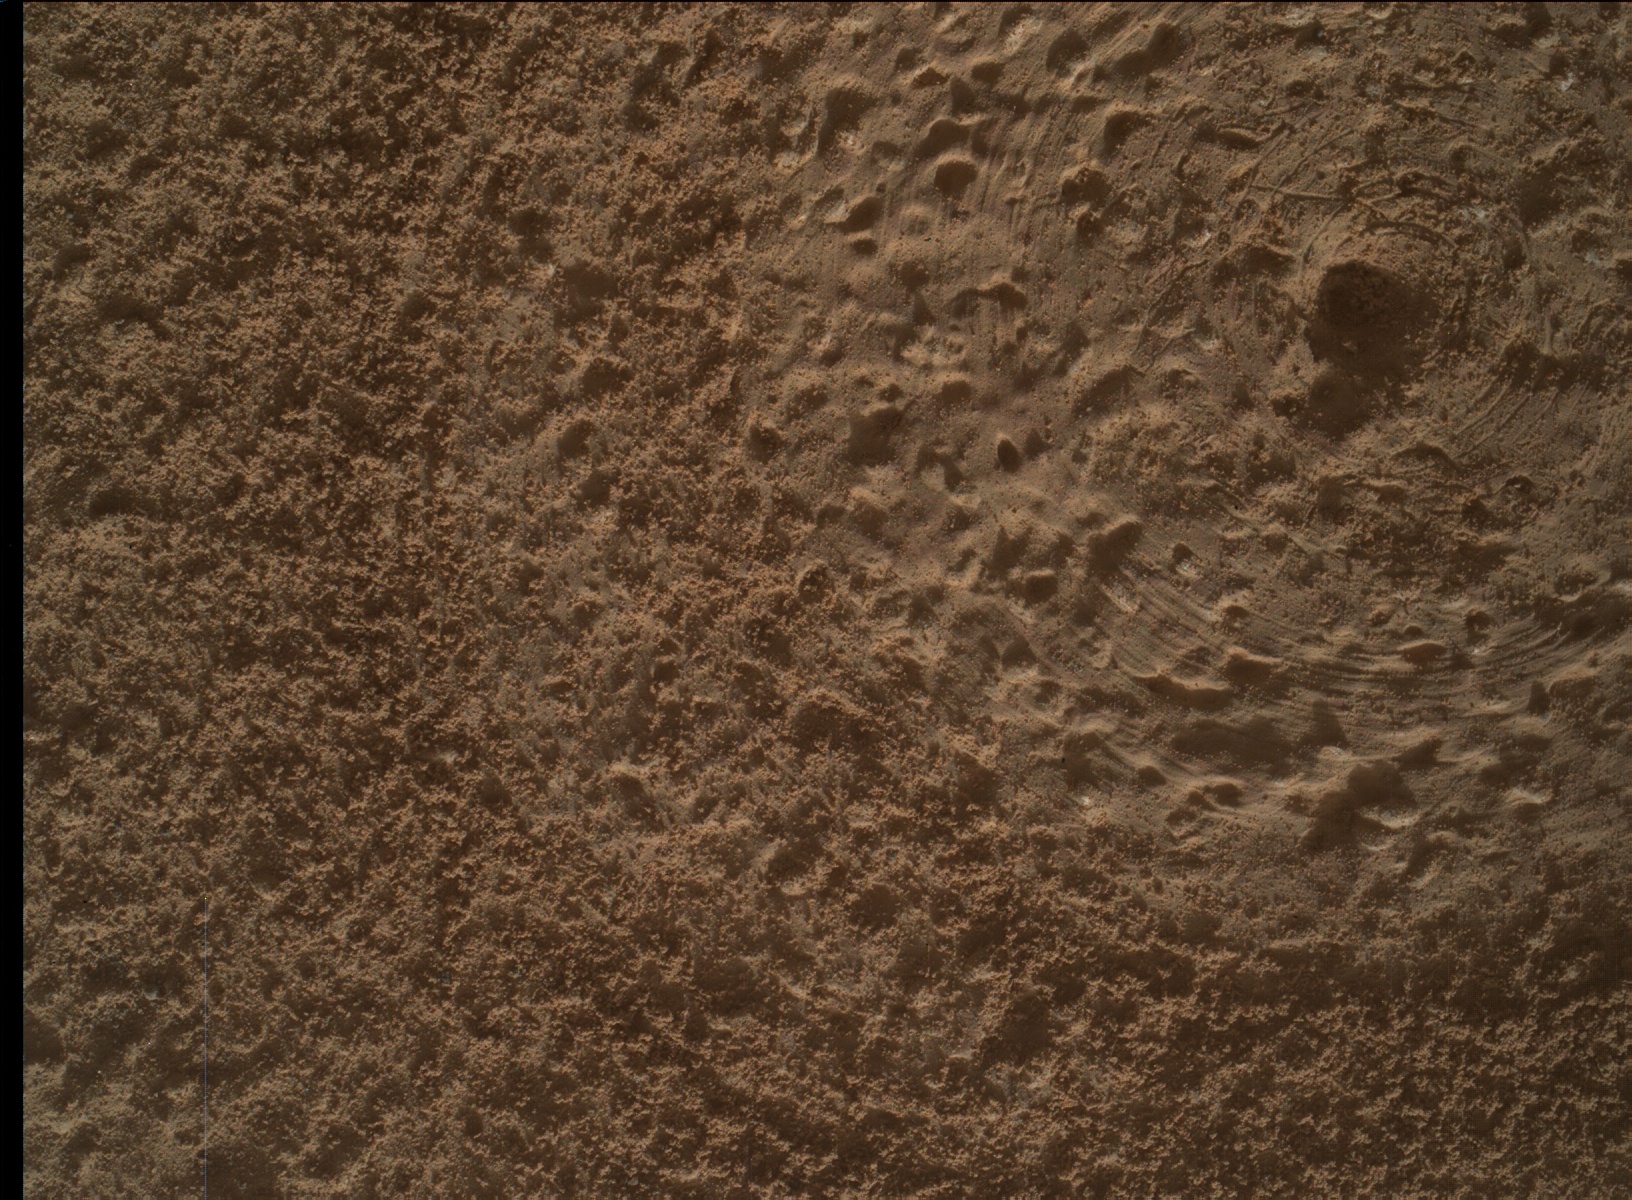 Nasa's Mars rover Curiosity acquired this image using its Mars Hand Lens Imager (MAHLI) on Sol 3221